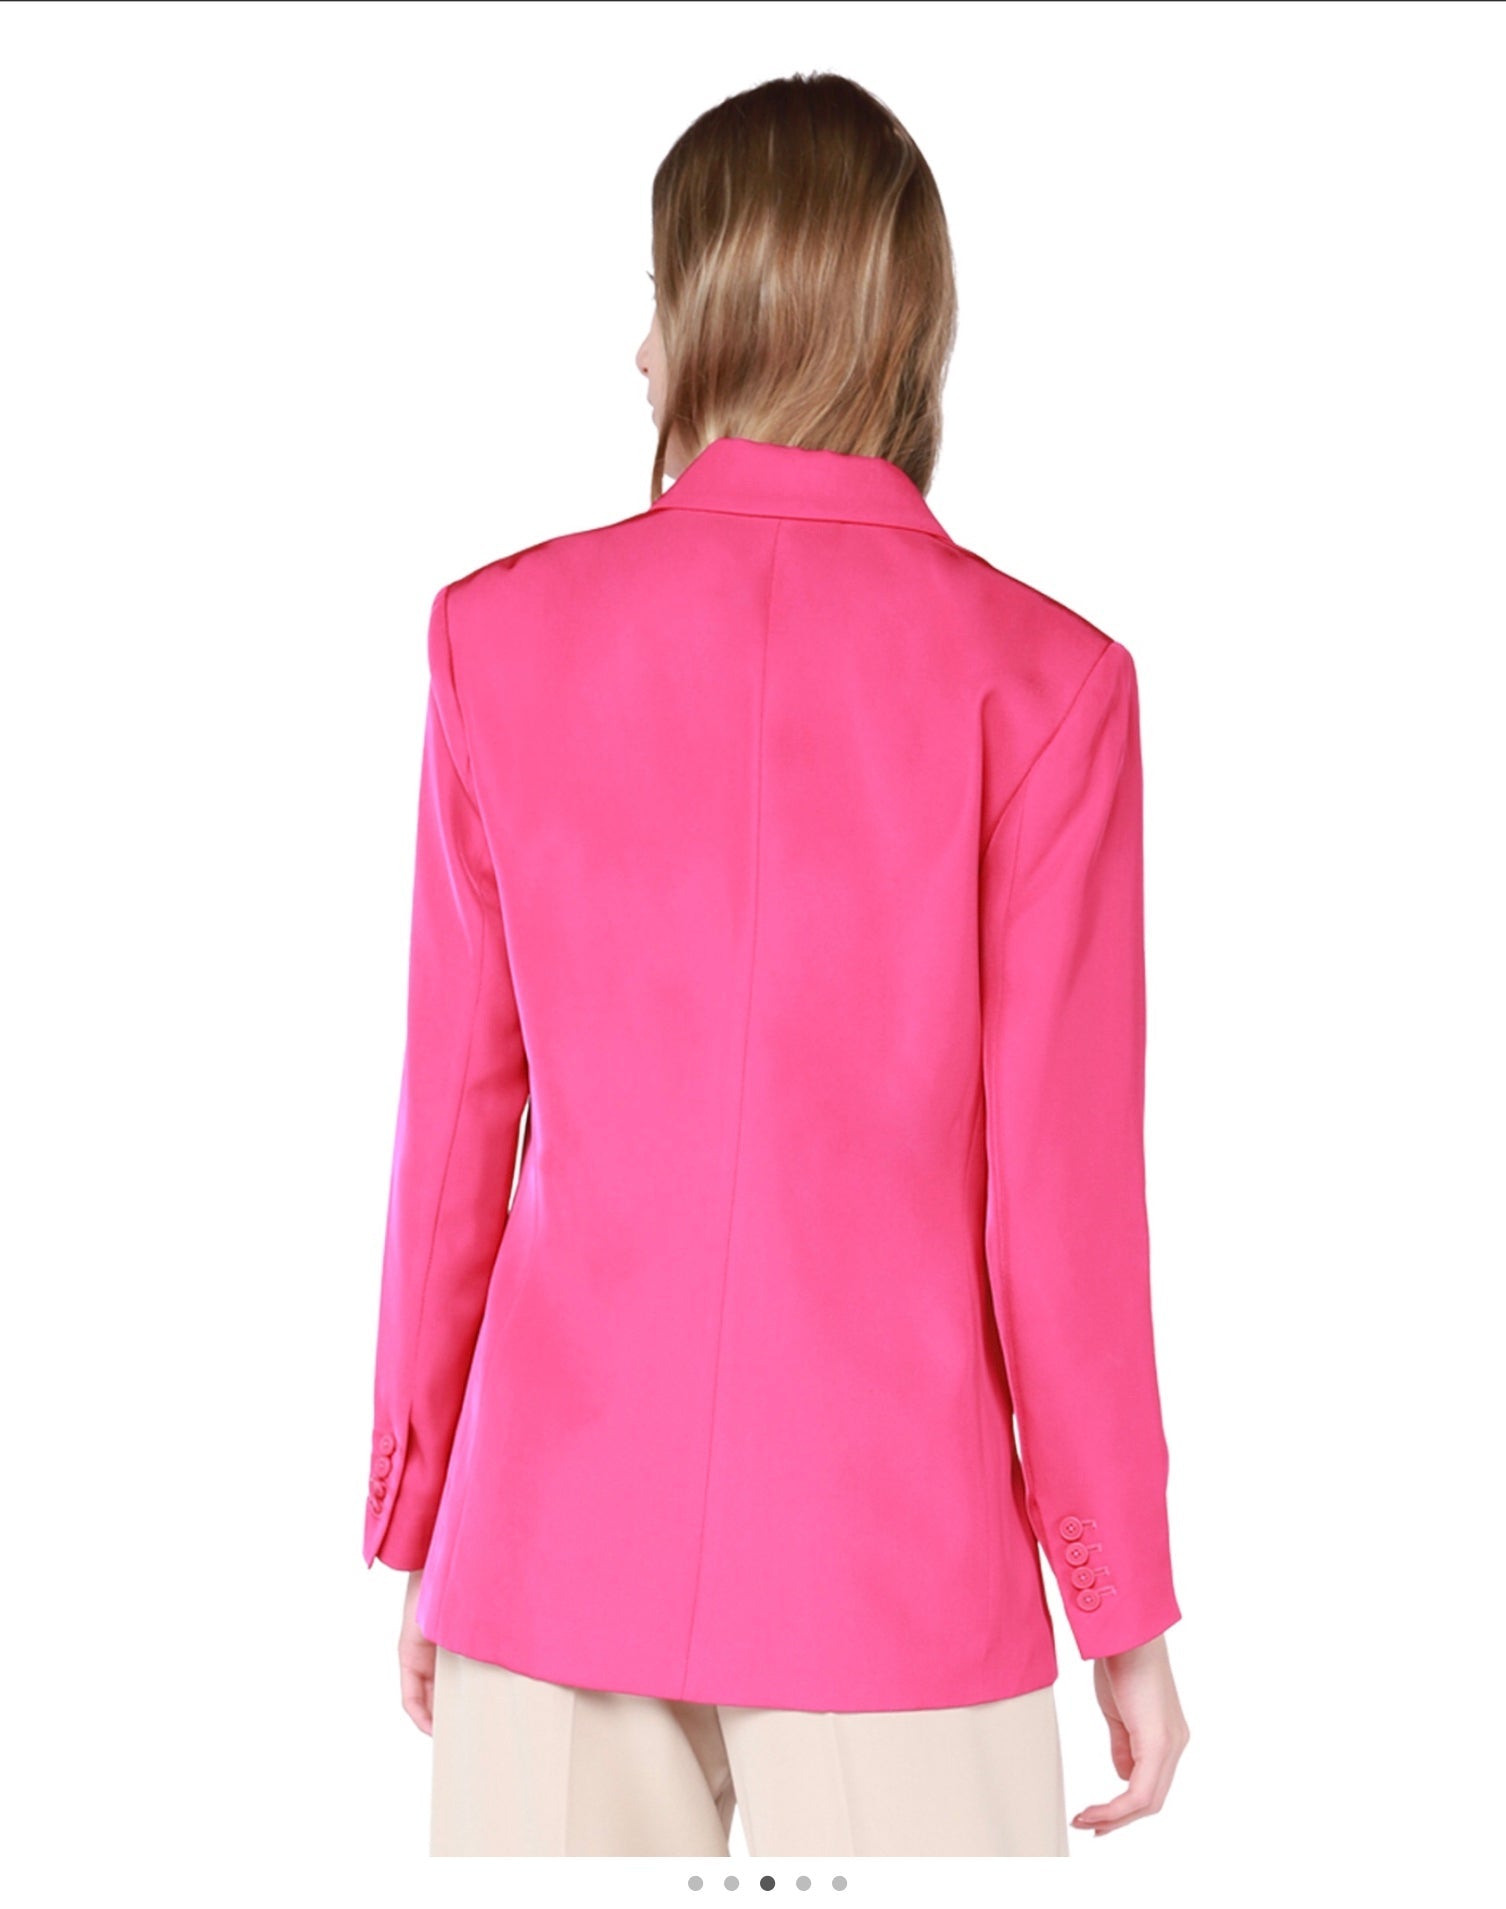 Double Breasted Blazer - Hot Pink - Blue Sky Clothing & Lingerie